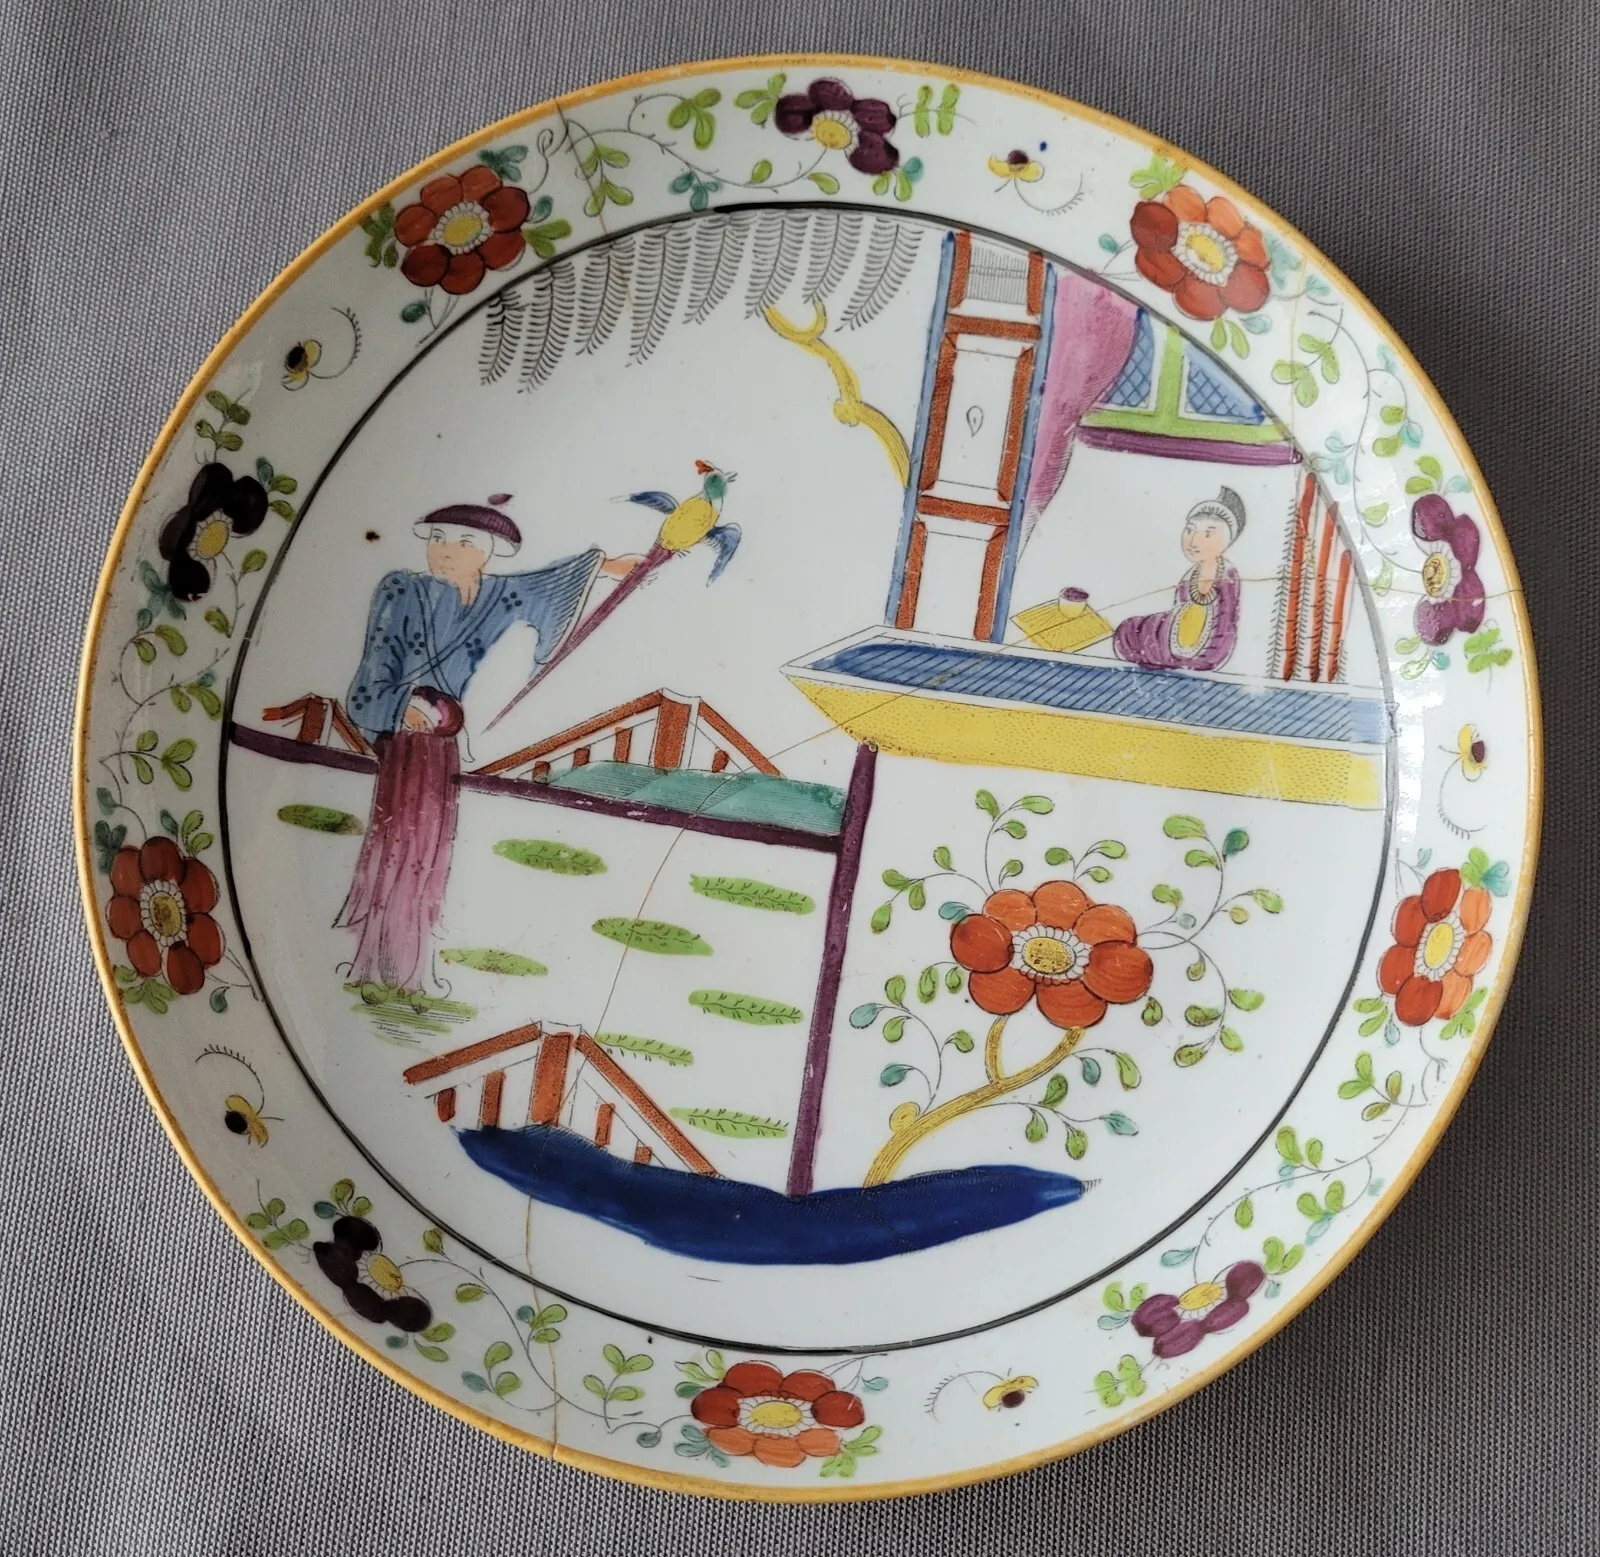 NEW HALL CHINESE FIGS PAT 1040 LARGE SAUCER DISH C1812-18 PAT PRELLER COLLECTION - Picture 1 of 7